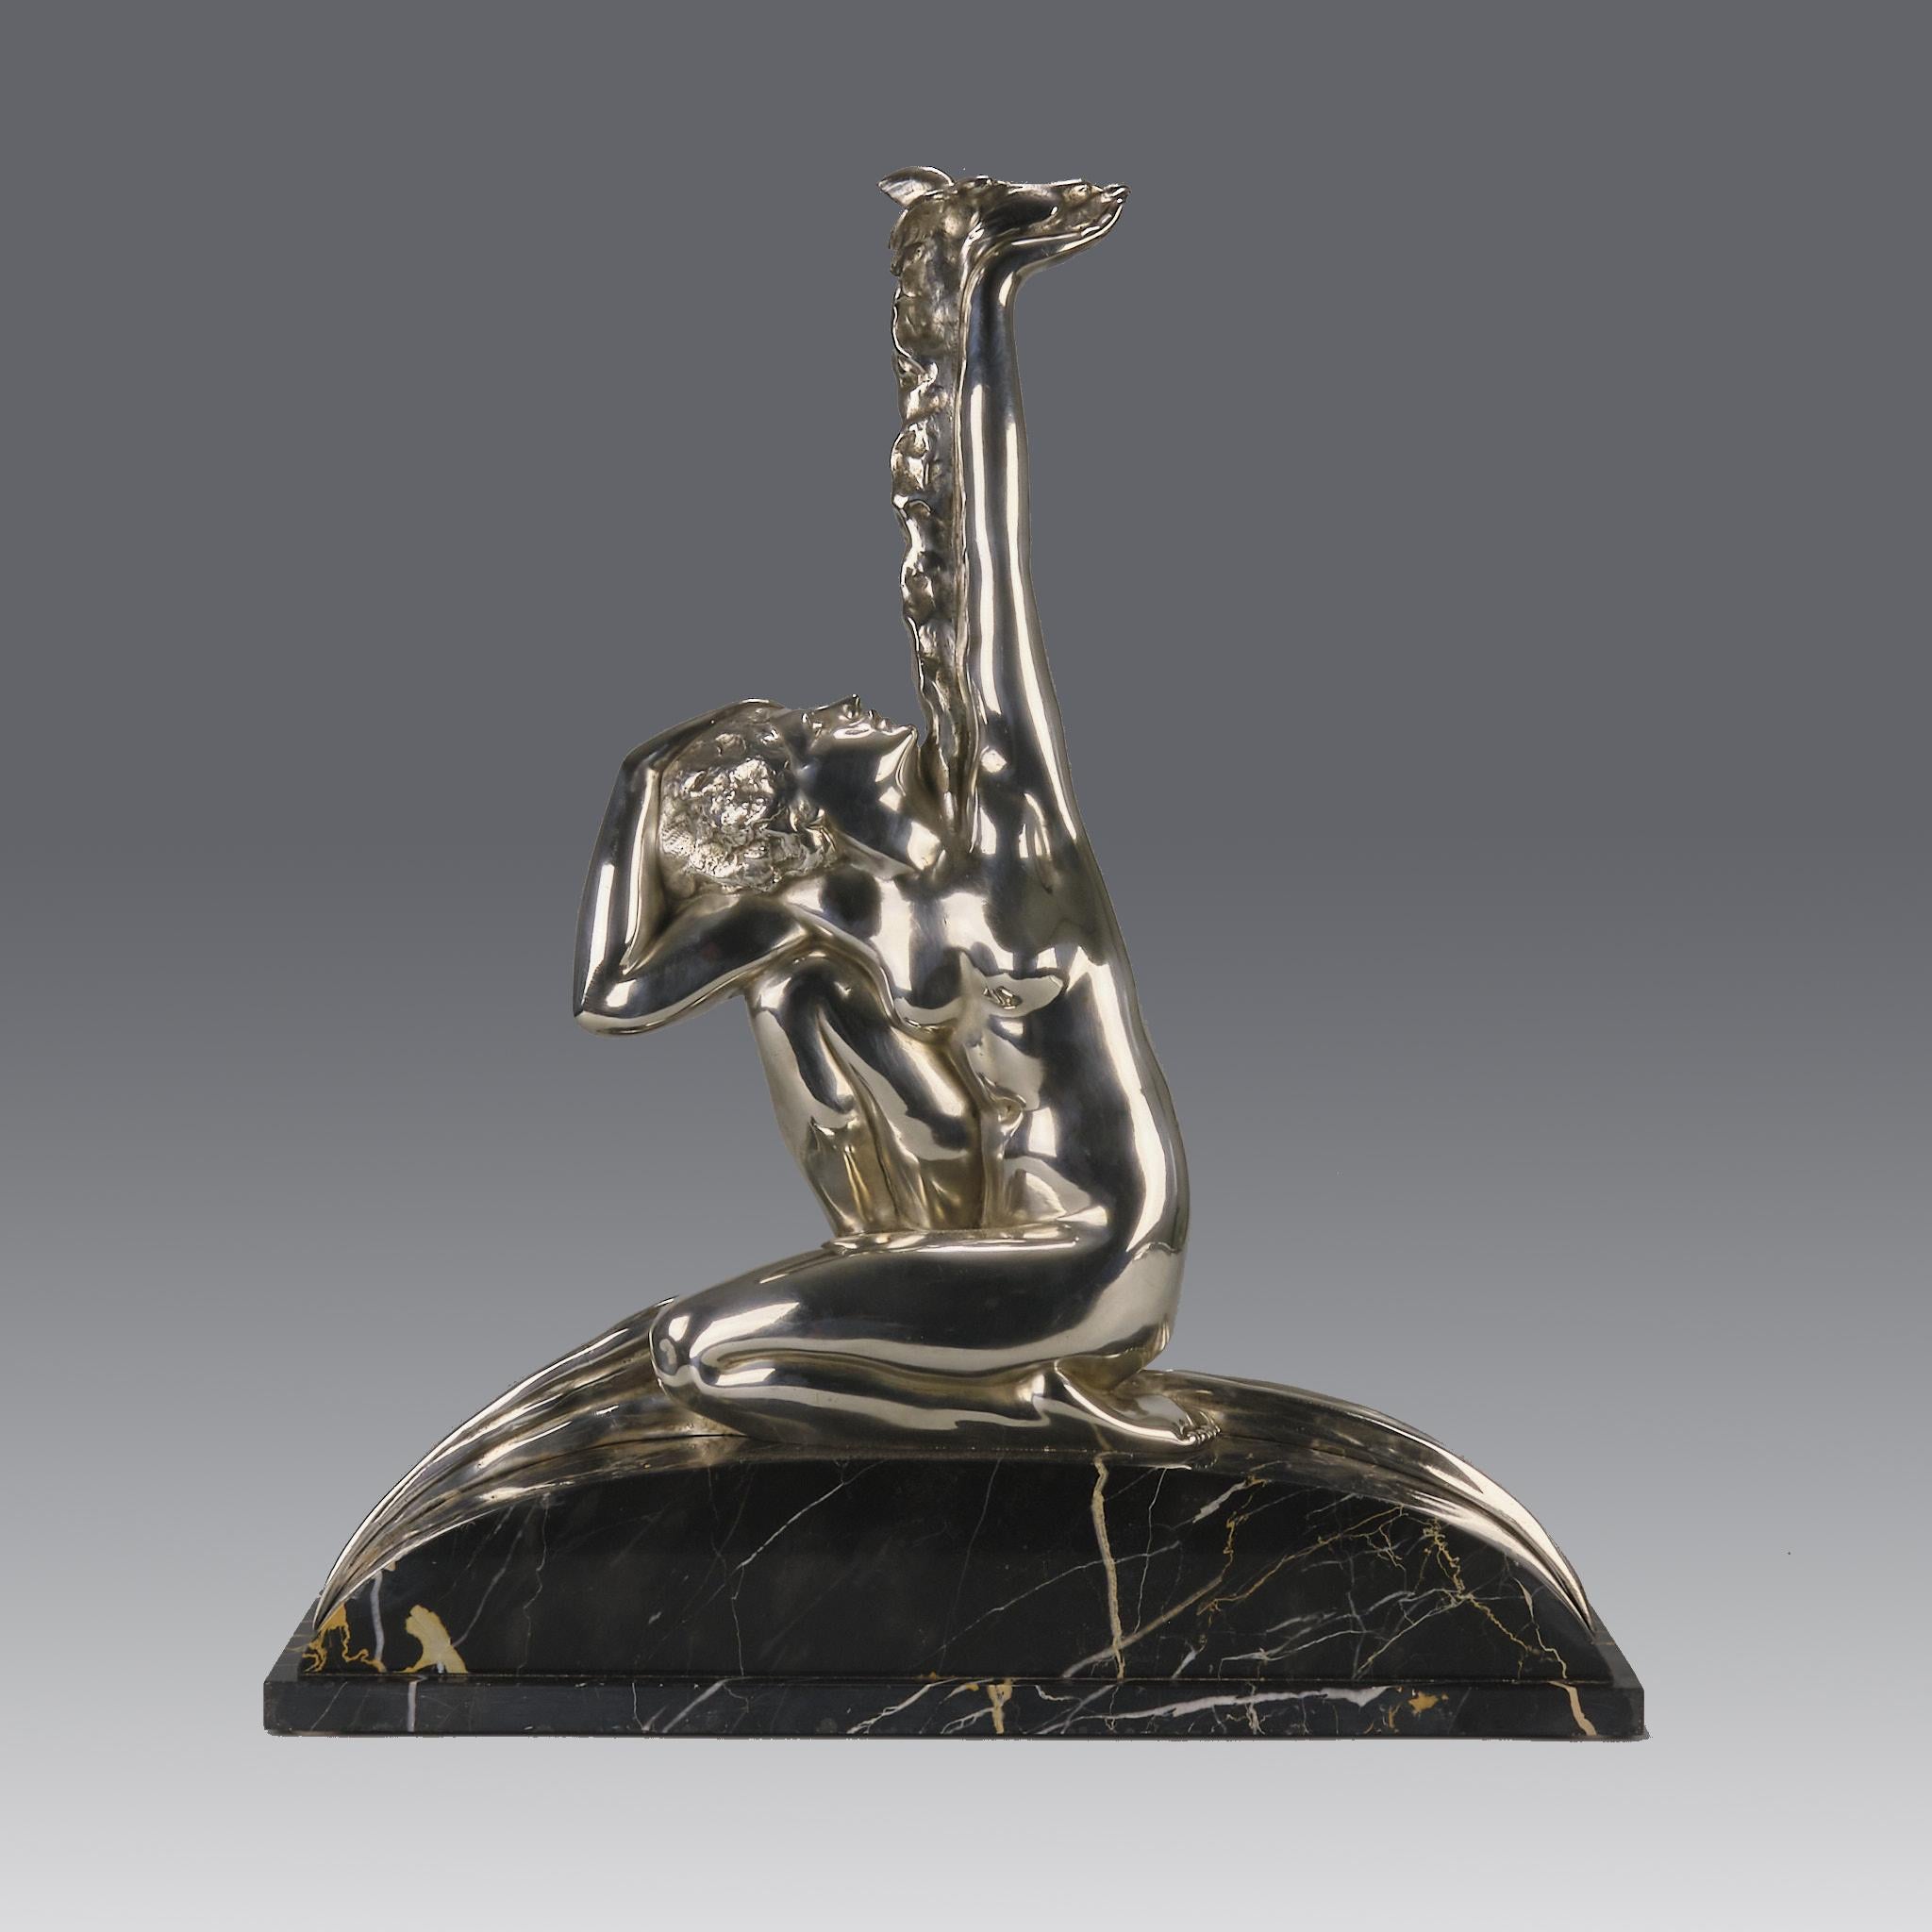 An attractive early 20th Century Italian Art Deco silvered bronze figure of a naked kneeling beauty holding aloft a dove in her hand, exhibiting excellent detail and very fine detail. Raised on a portoro marble base and signed A.